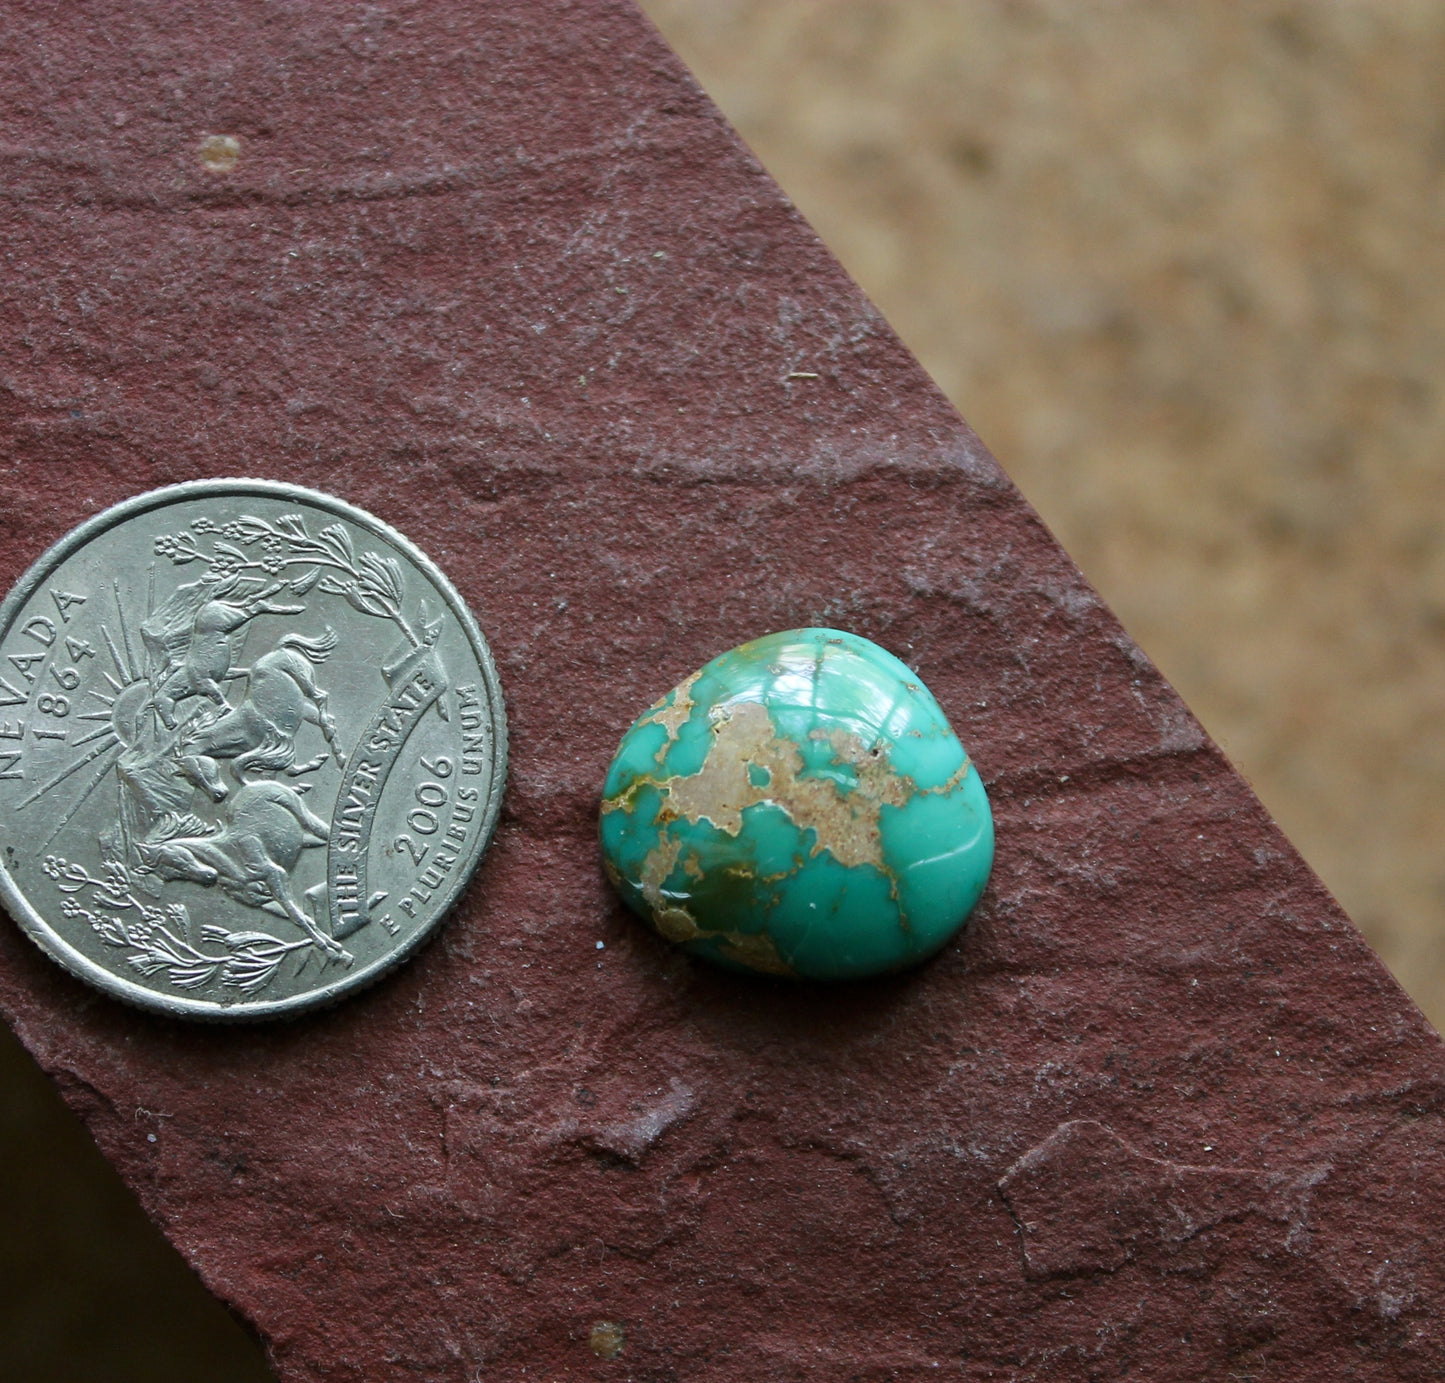 11 carat teal blue turquoise cabochon from near Yerington NV (Harcross)